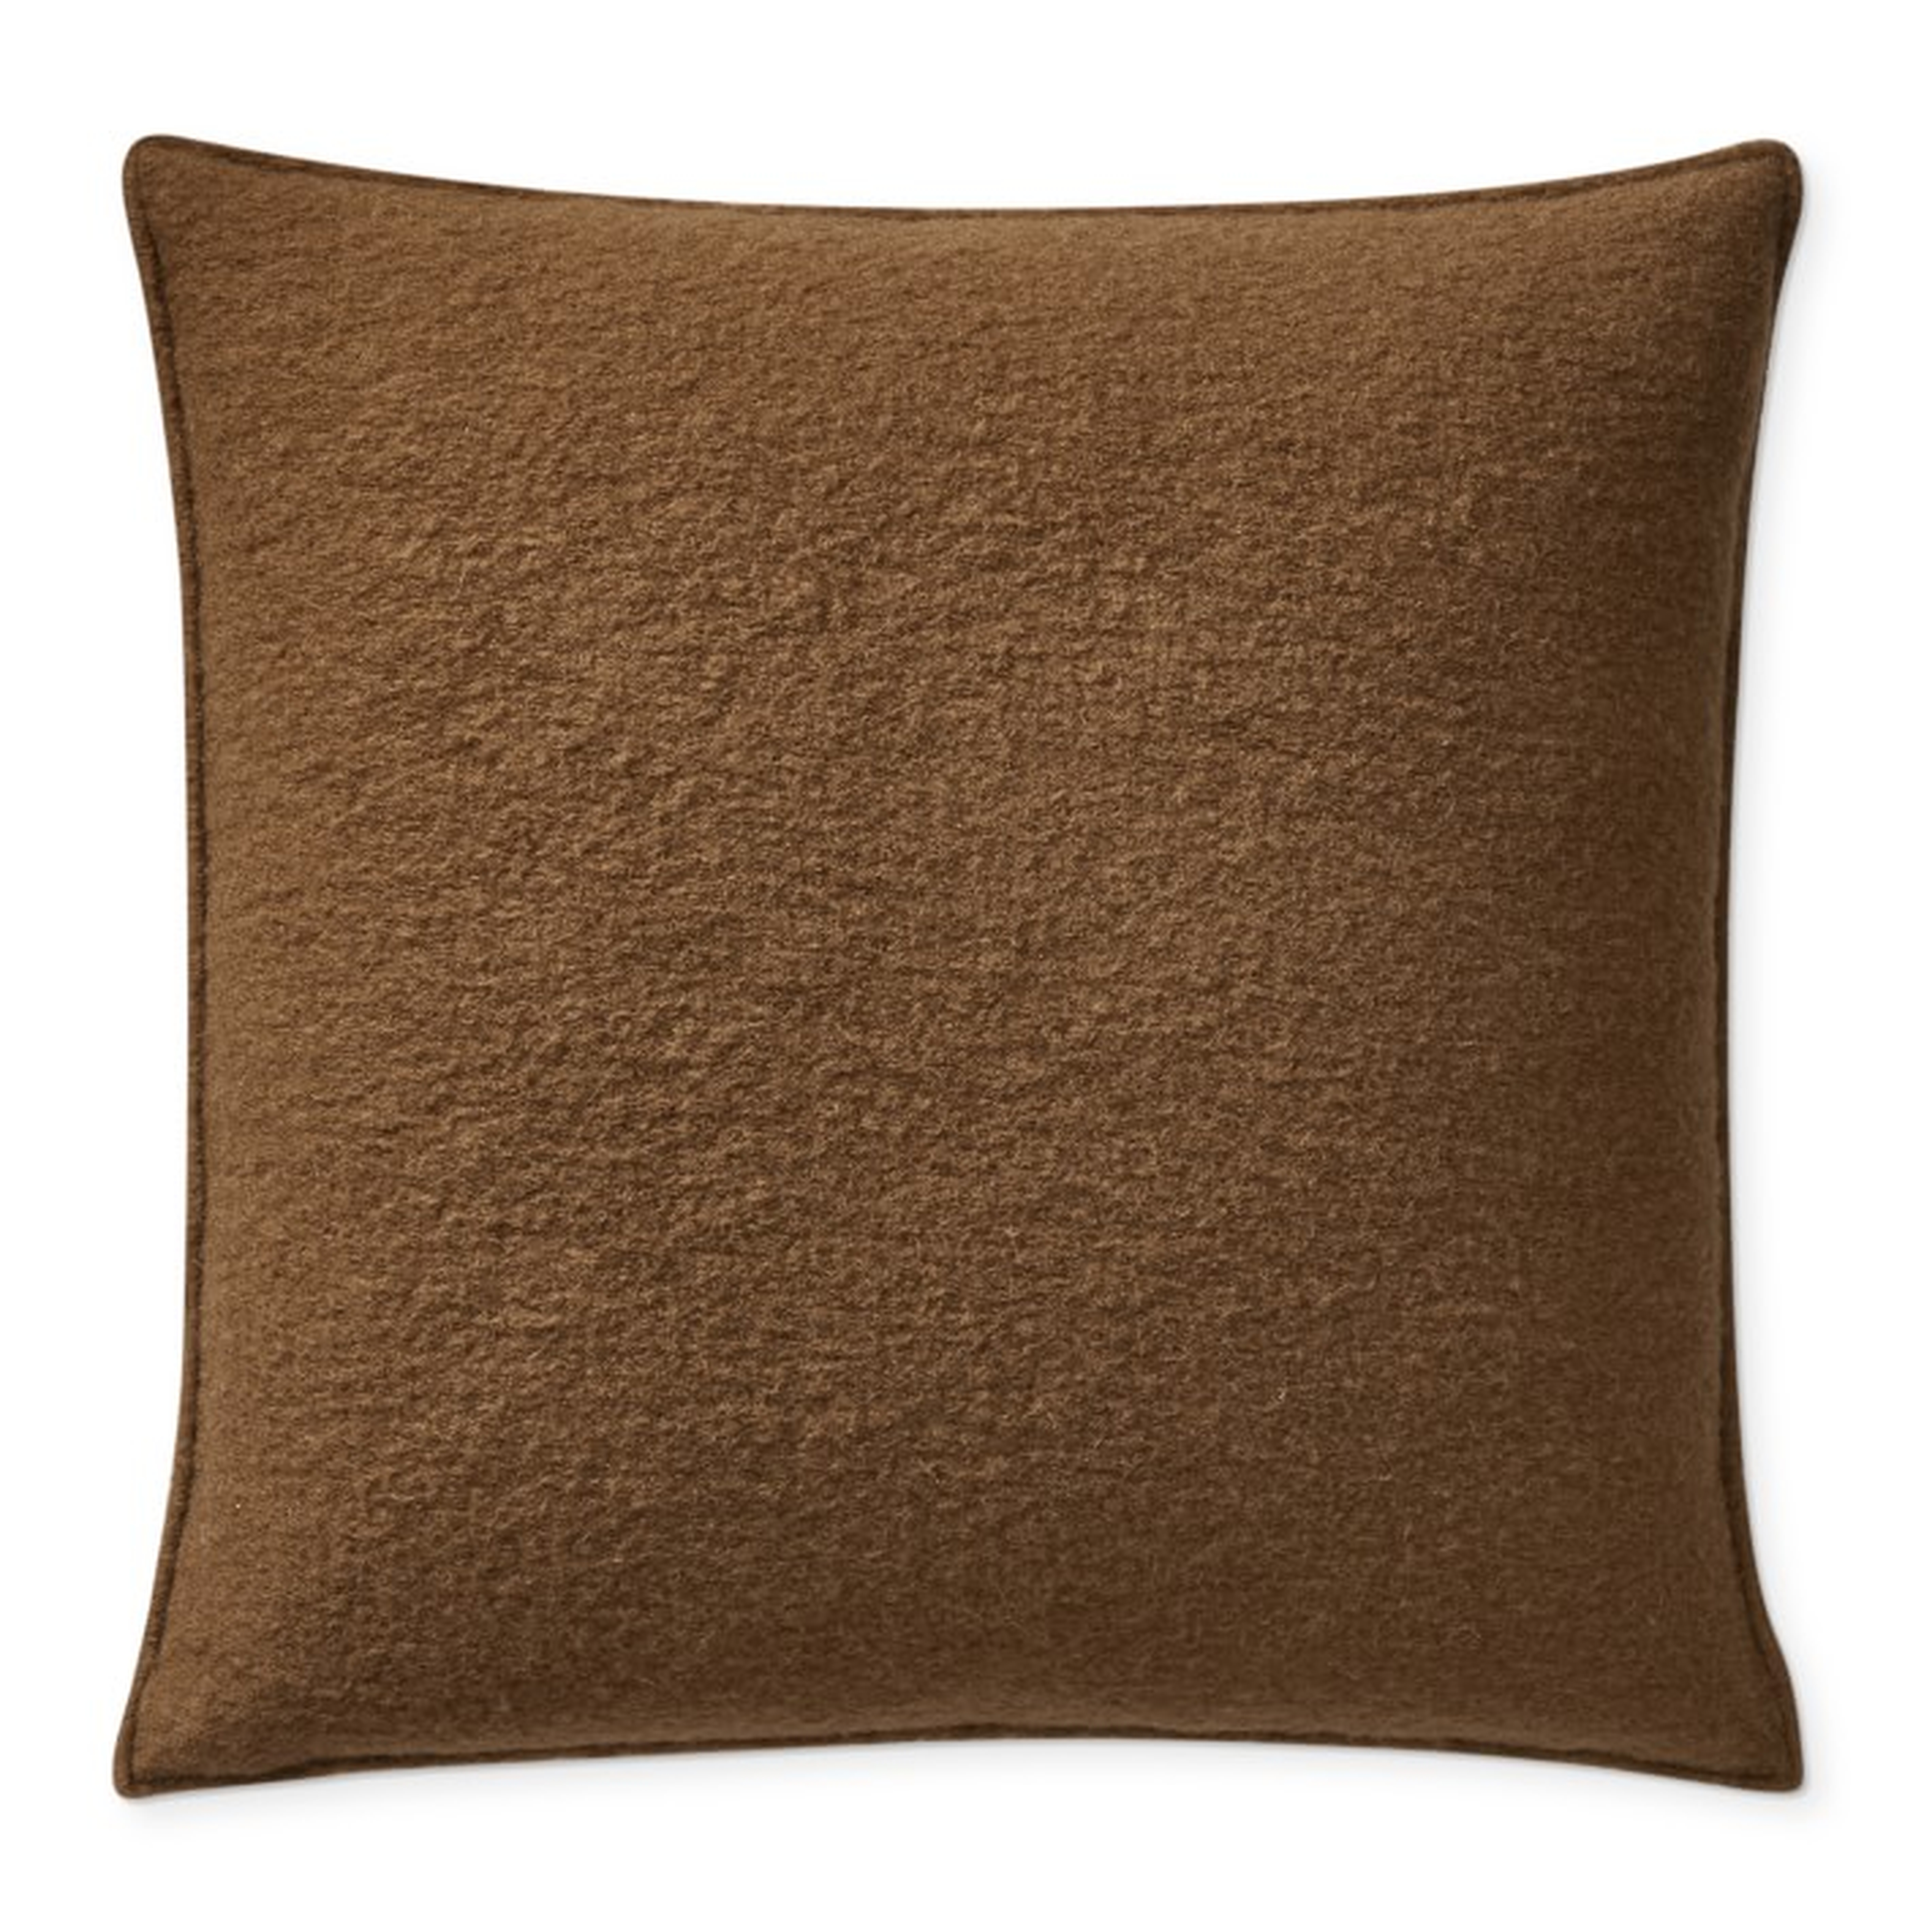 Italian Boiled Wool Solid Pillow Cover - Bronze - Williams Sonoma Home